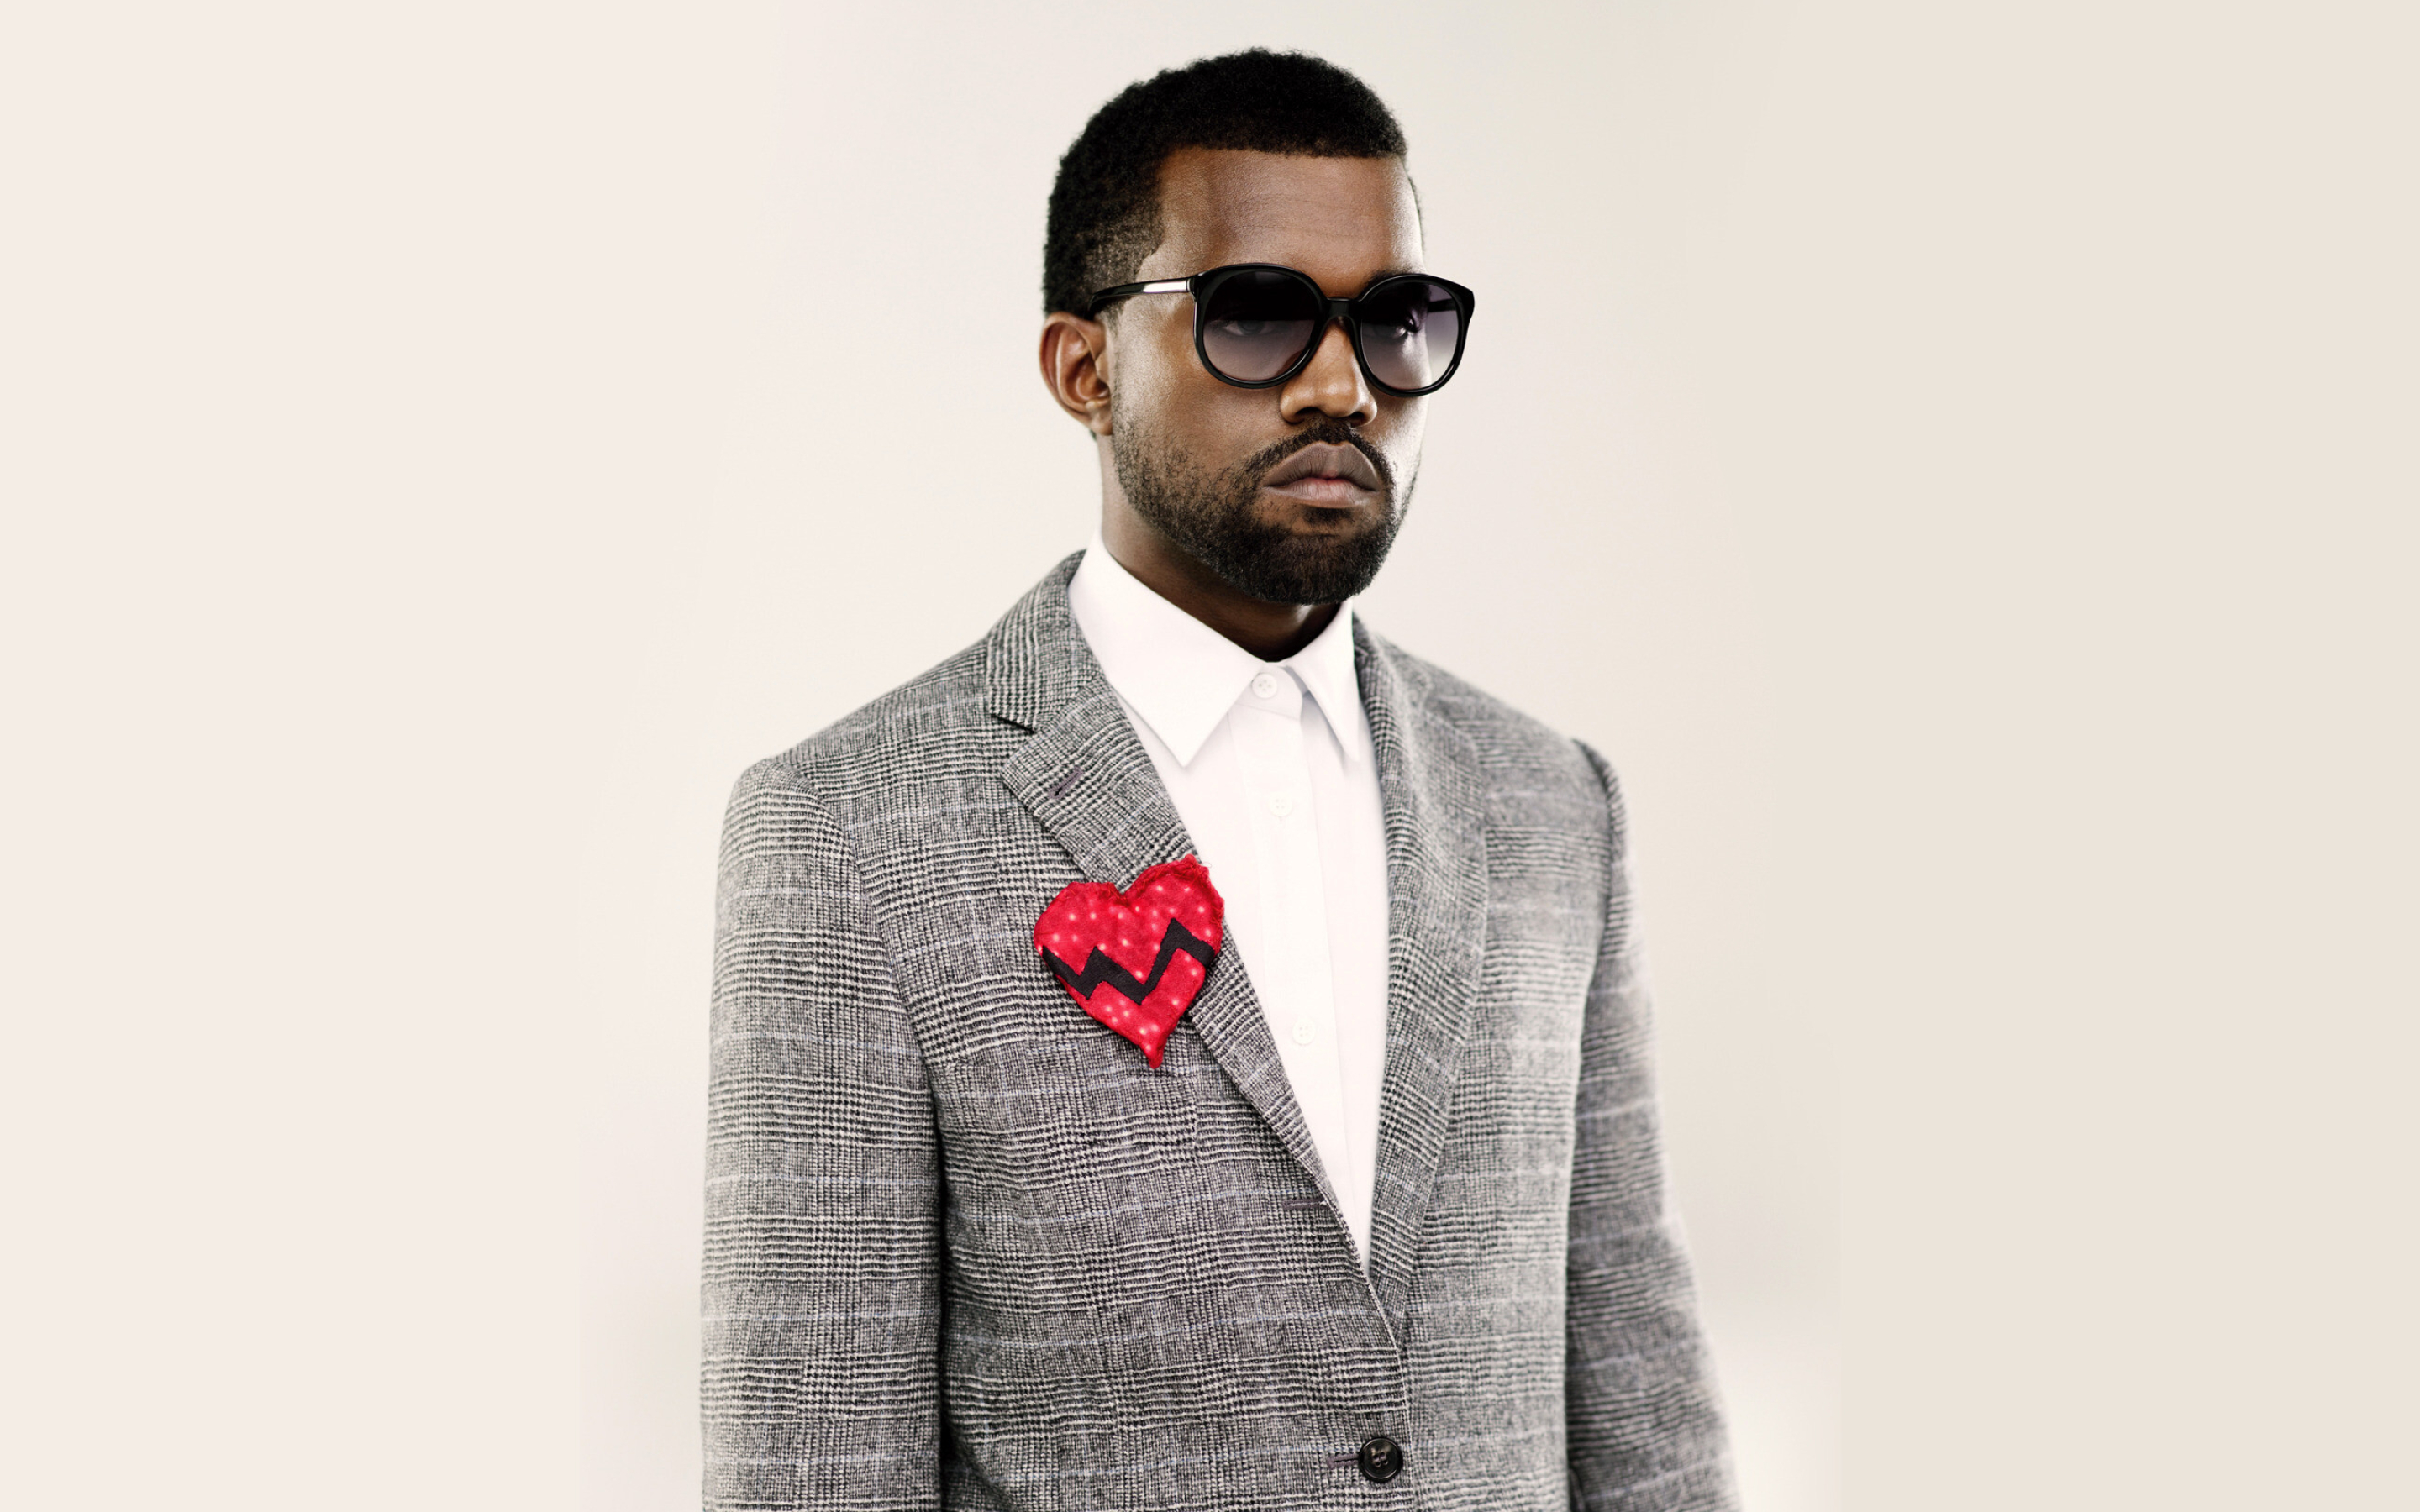 Kanye West: Founder of the GOOD Music record label. 2880x1800 HD Wallpaper.